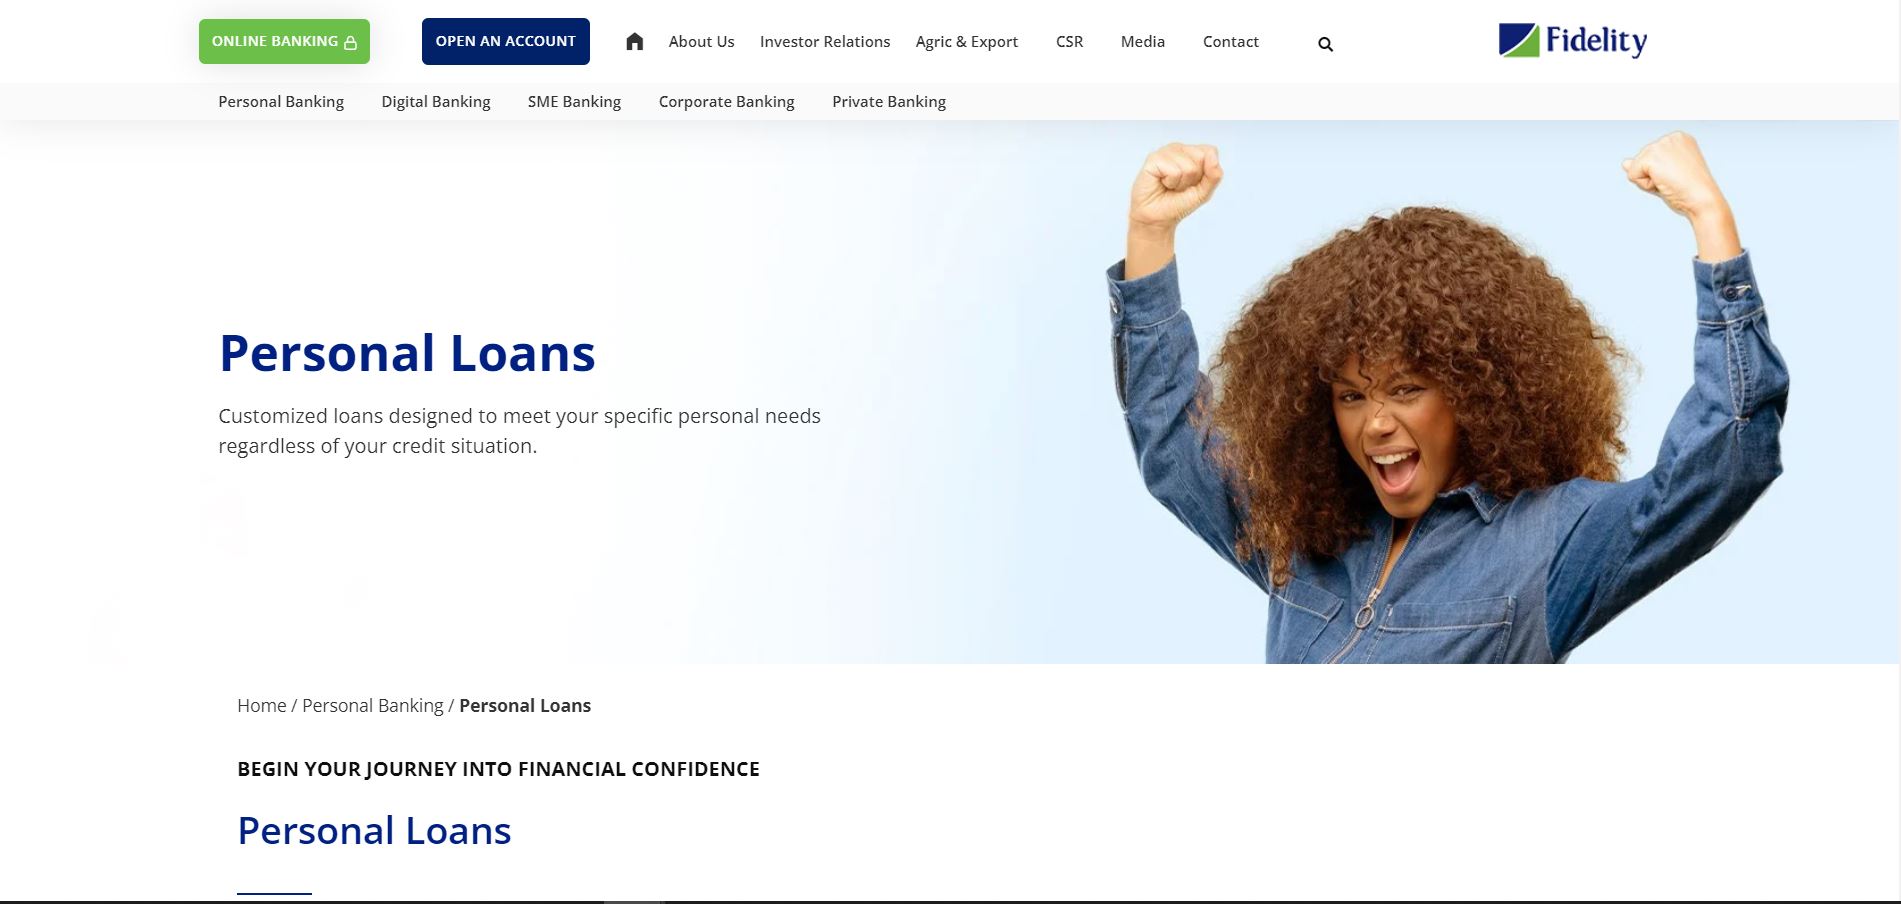 How to get a loan from Fidelity Bank